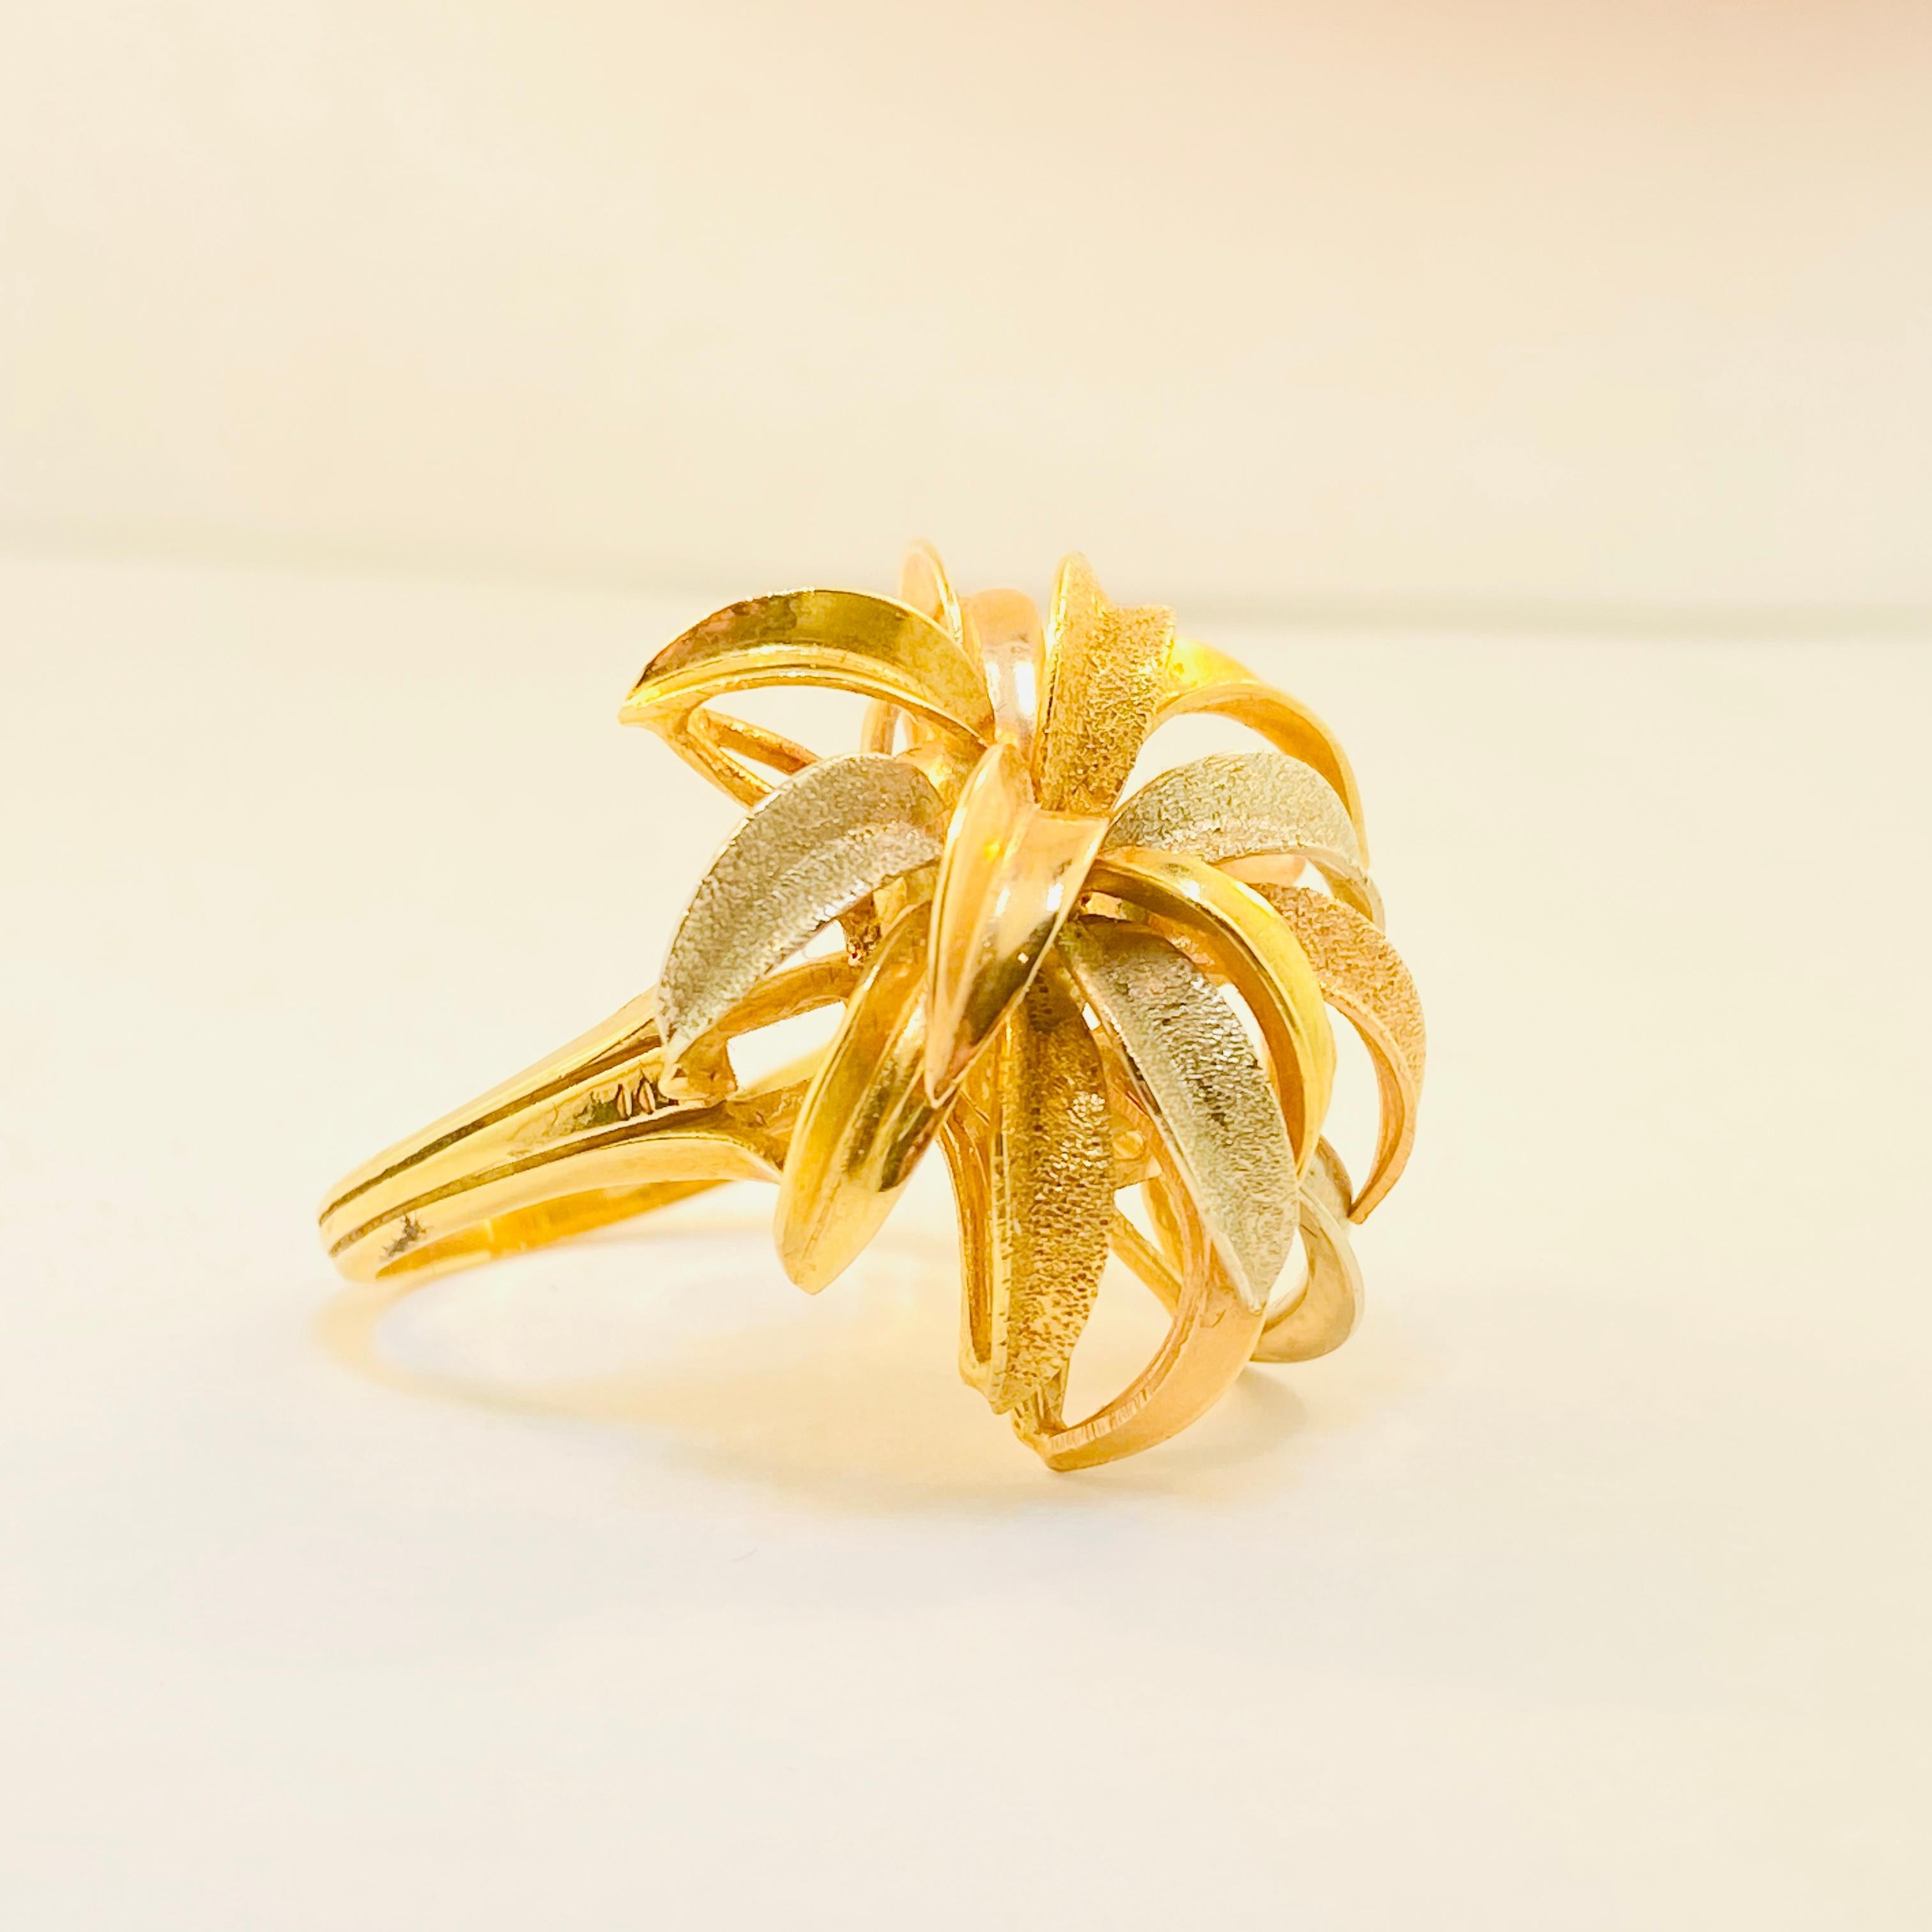 You can have “fireworks” with this stunning ring with solid 14 karat gold in three colors.  Rose, yellow, and white gold metal that looks like a spectacular blast of gold!  What's a better way to show off your style and the patriotic felling of the